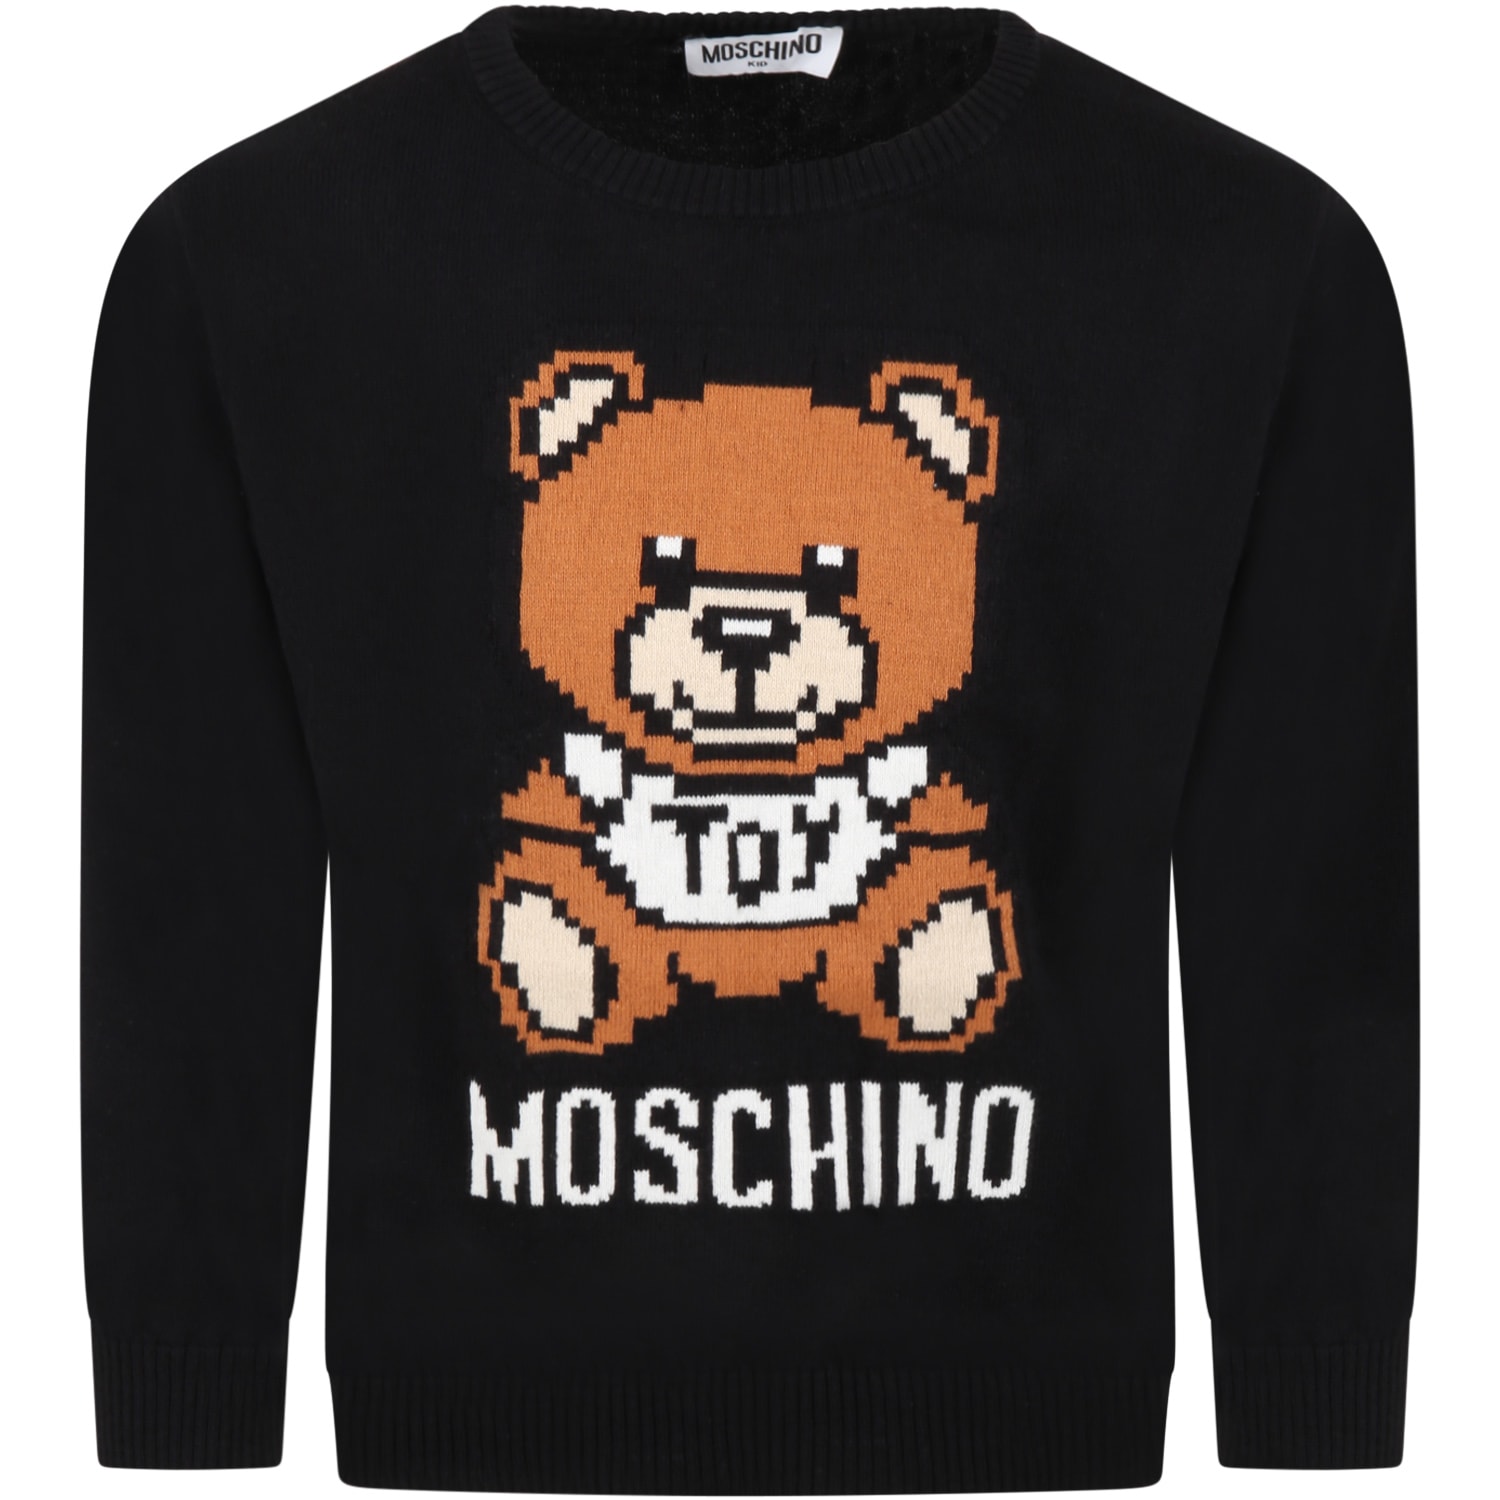 Moschino Black Sweater For Kids With Teddy Bear